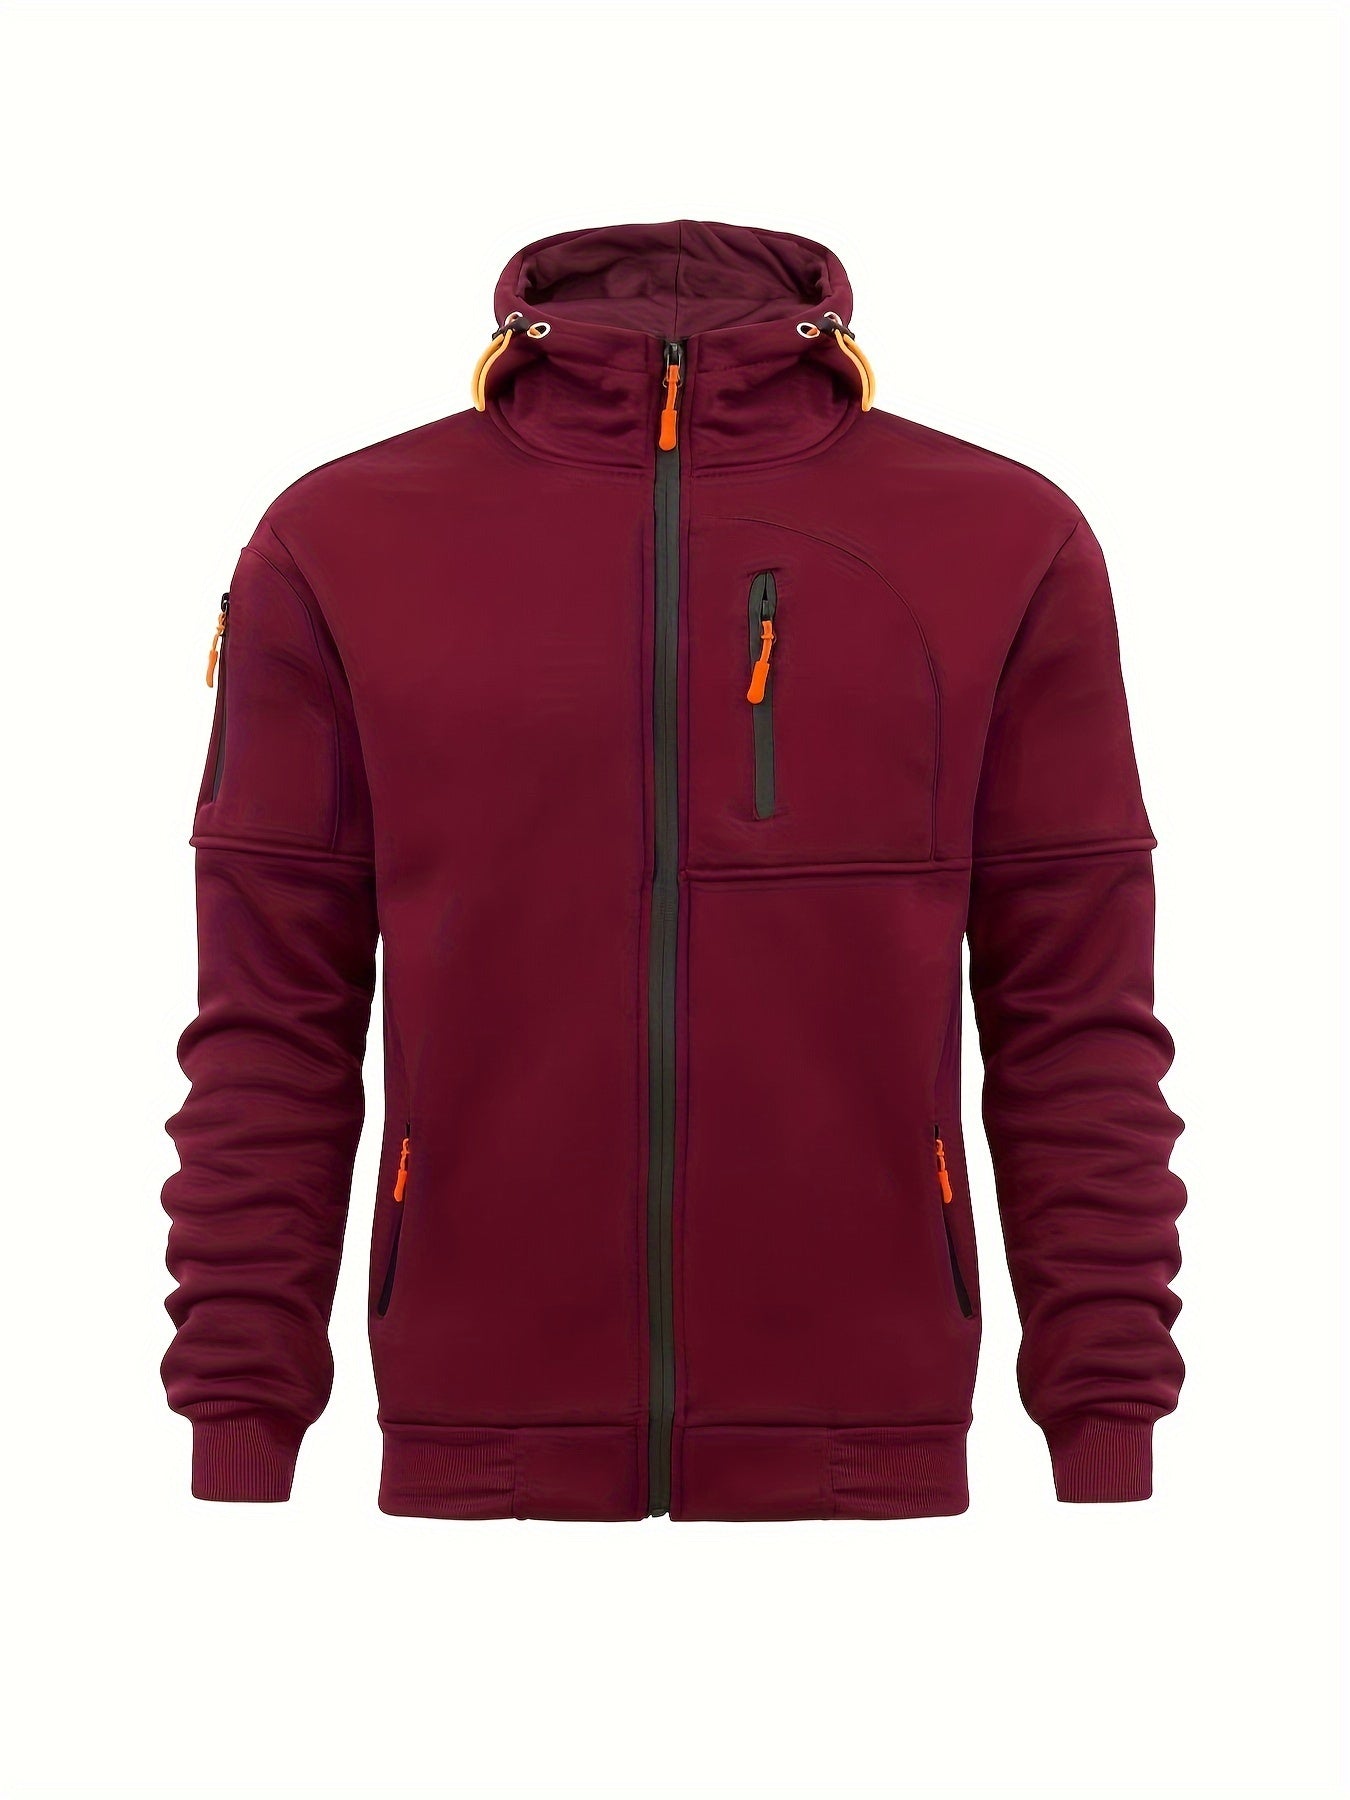 Cross-border New Large Size Men's Autumn And Winter Sports Fitness Jacket Casual Arm Zipper Sweater Cardigan Hooded Jacket